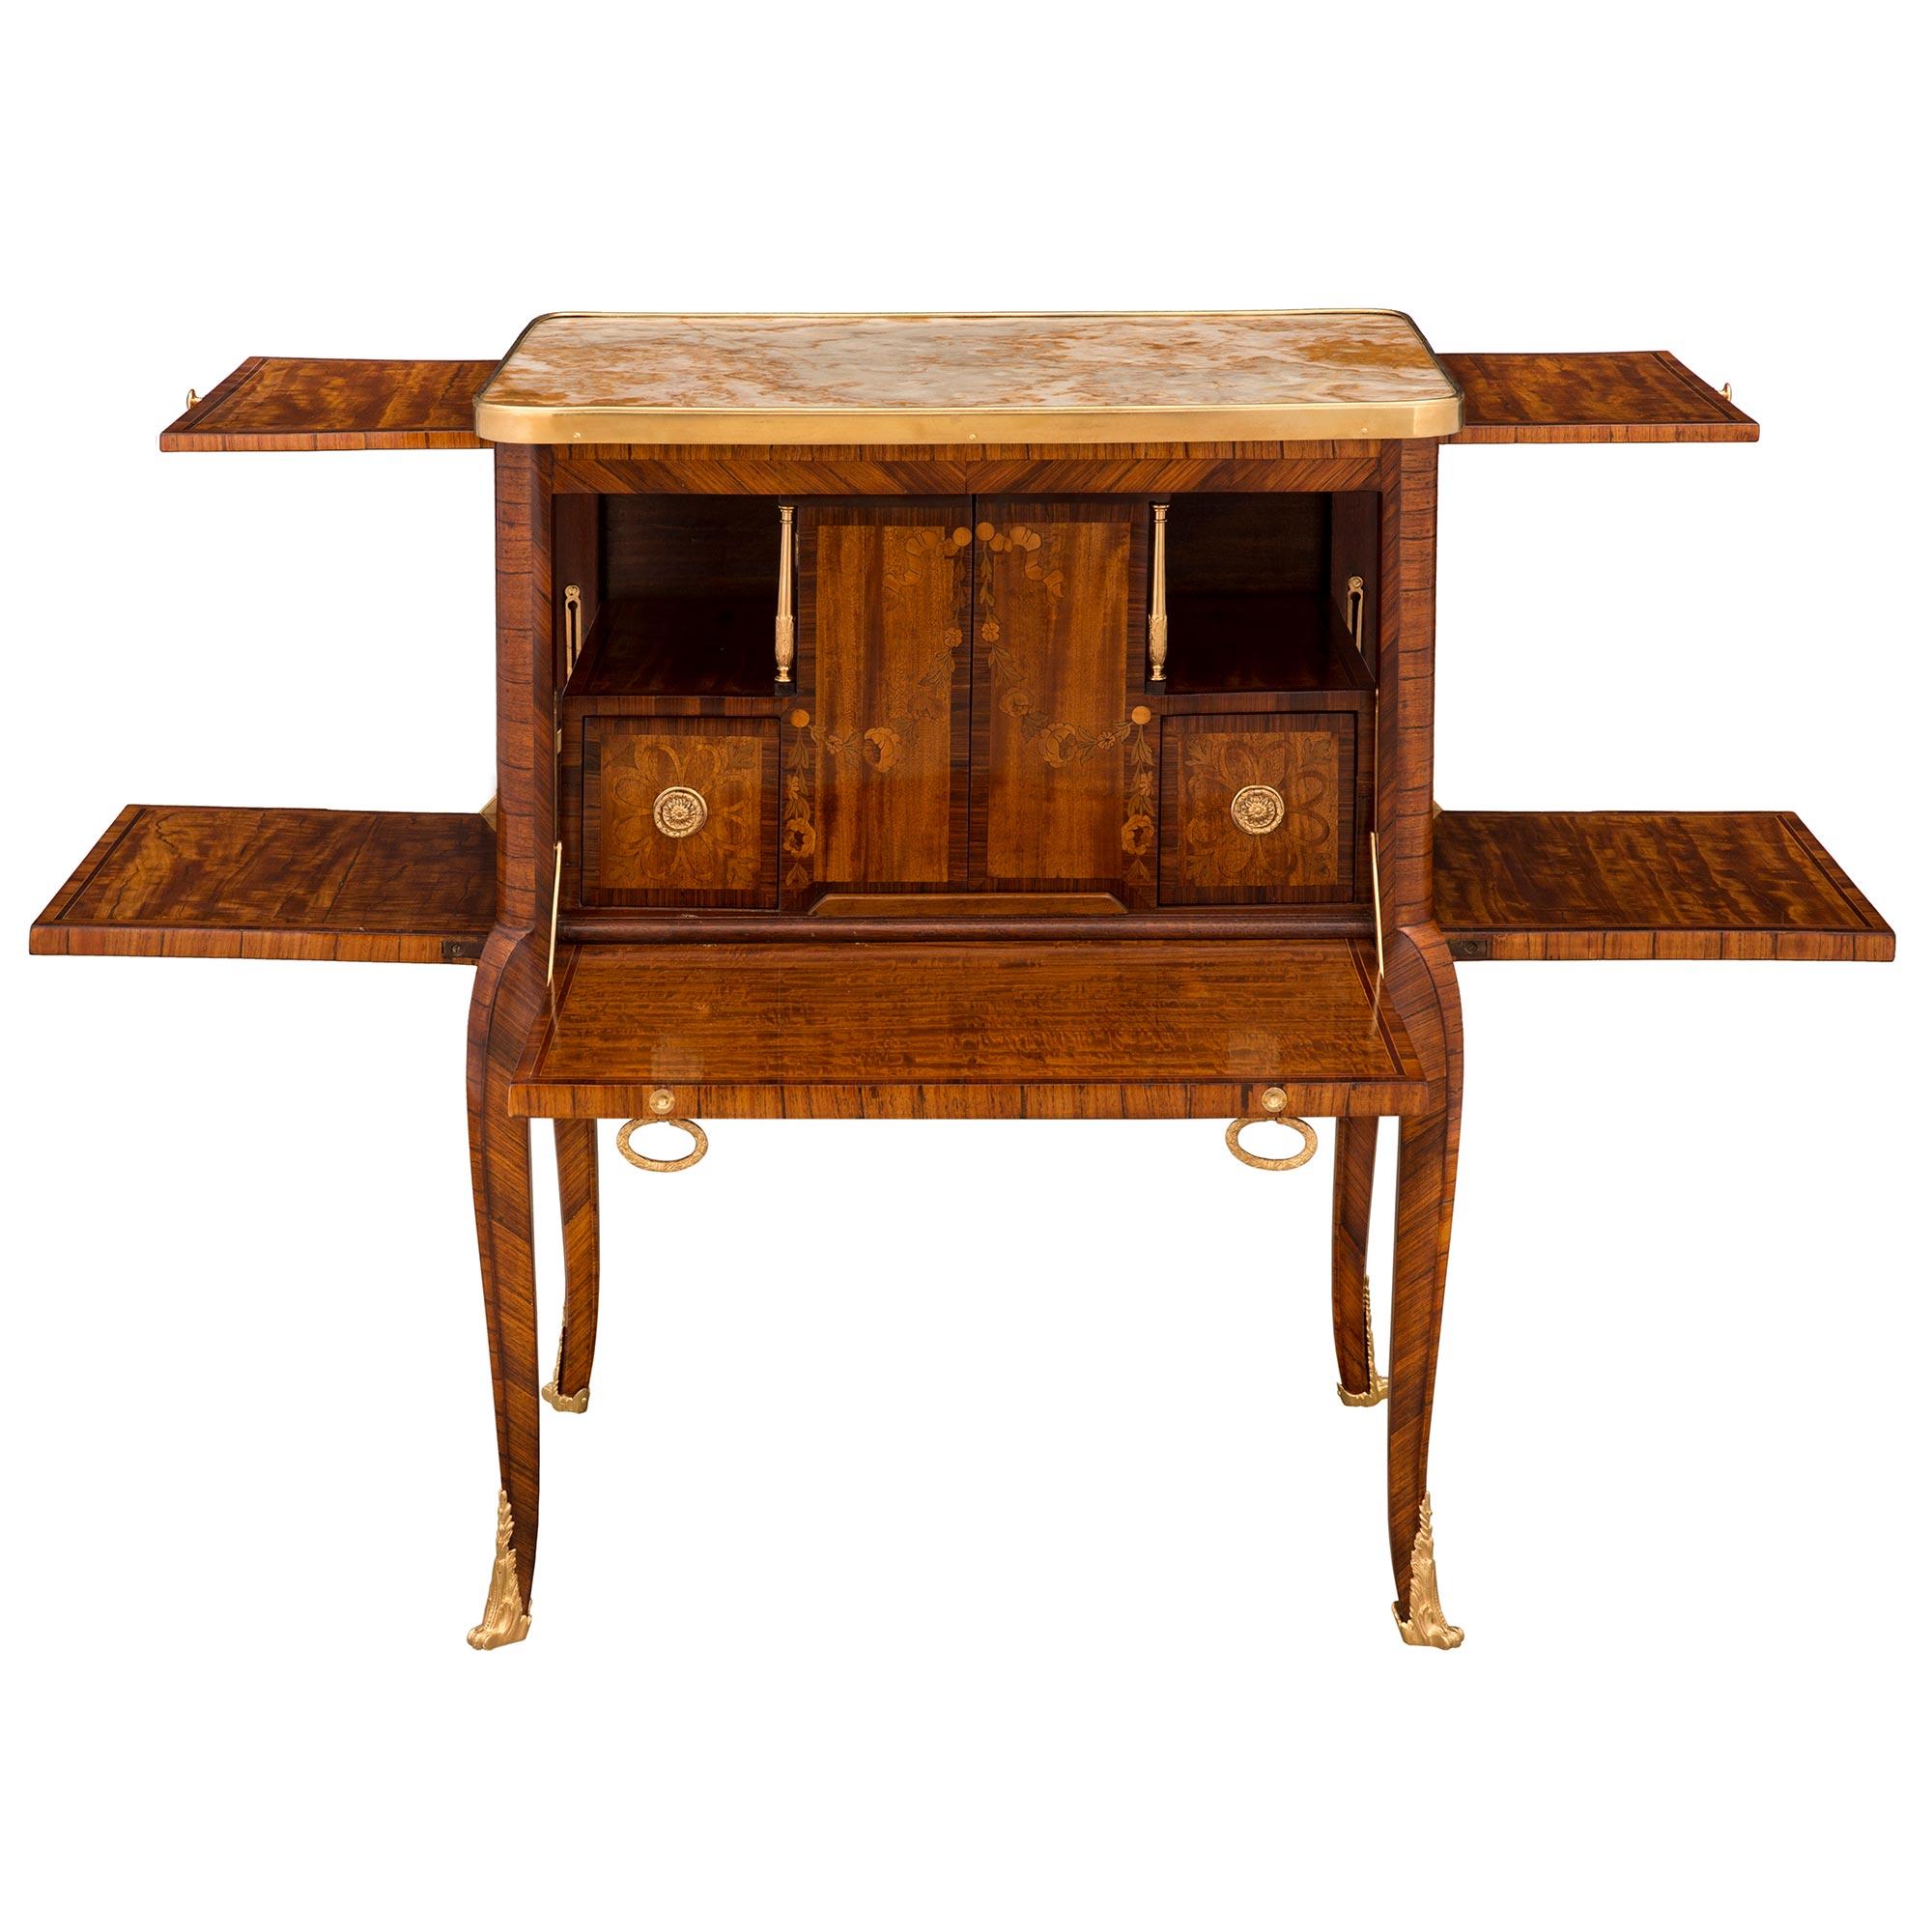 French 19th Century Transitional Style Bonheur du Jour In Good Condition For Sale In West Palm Beach, FL